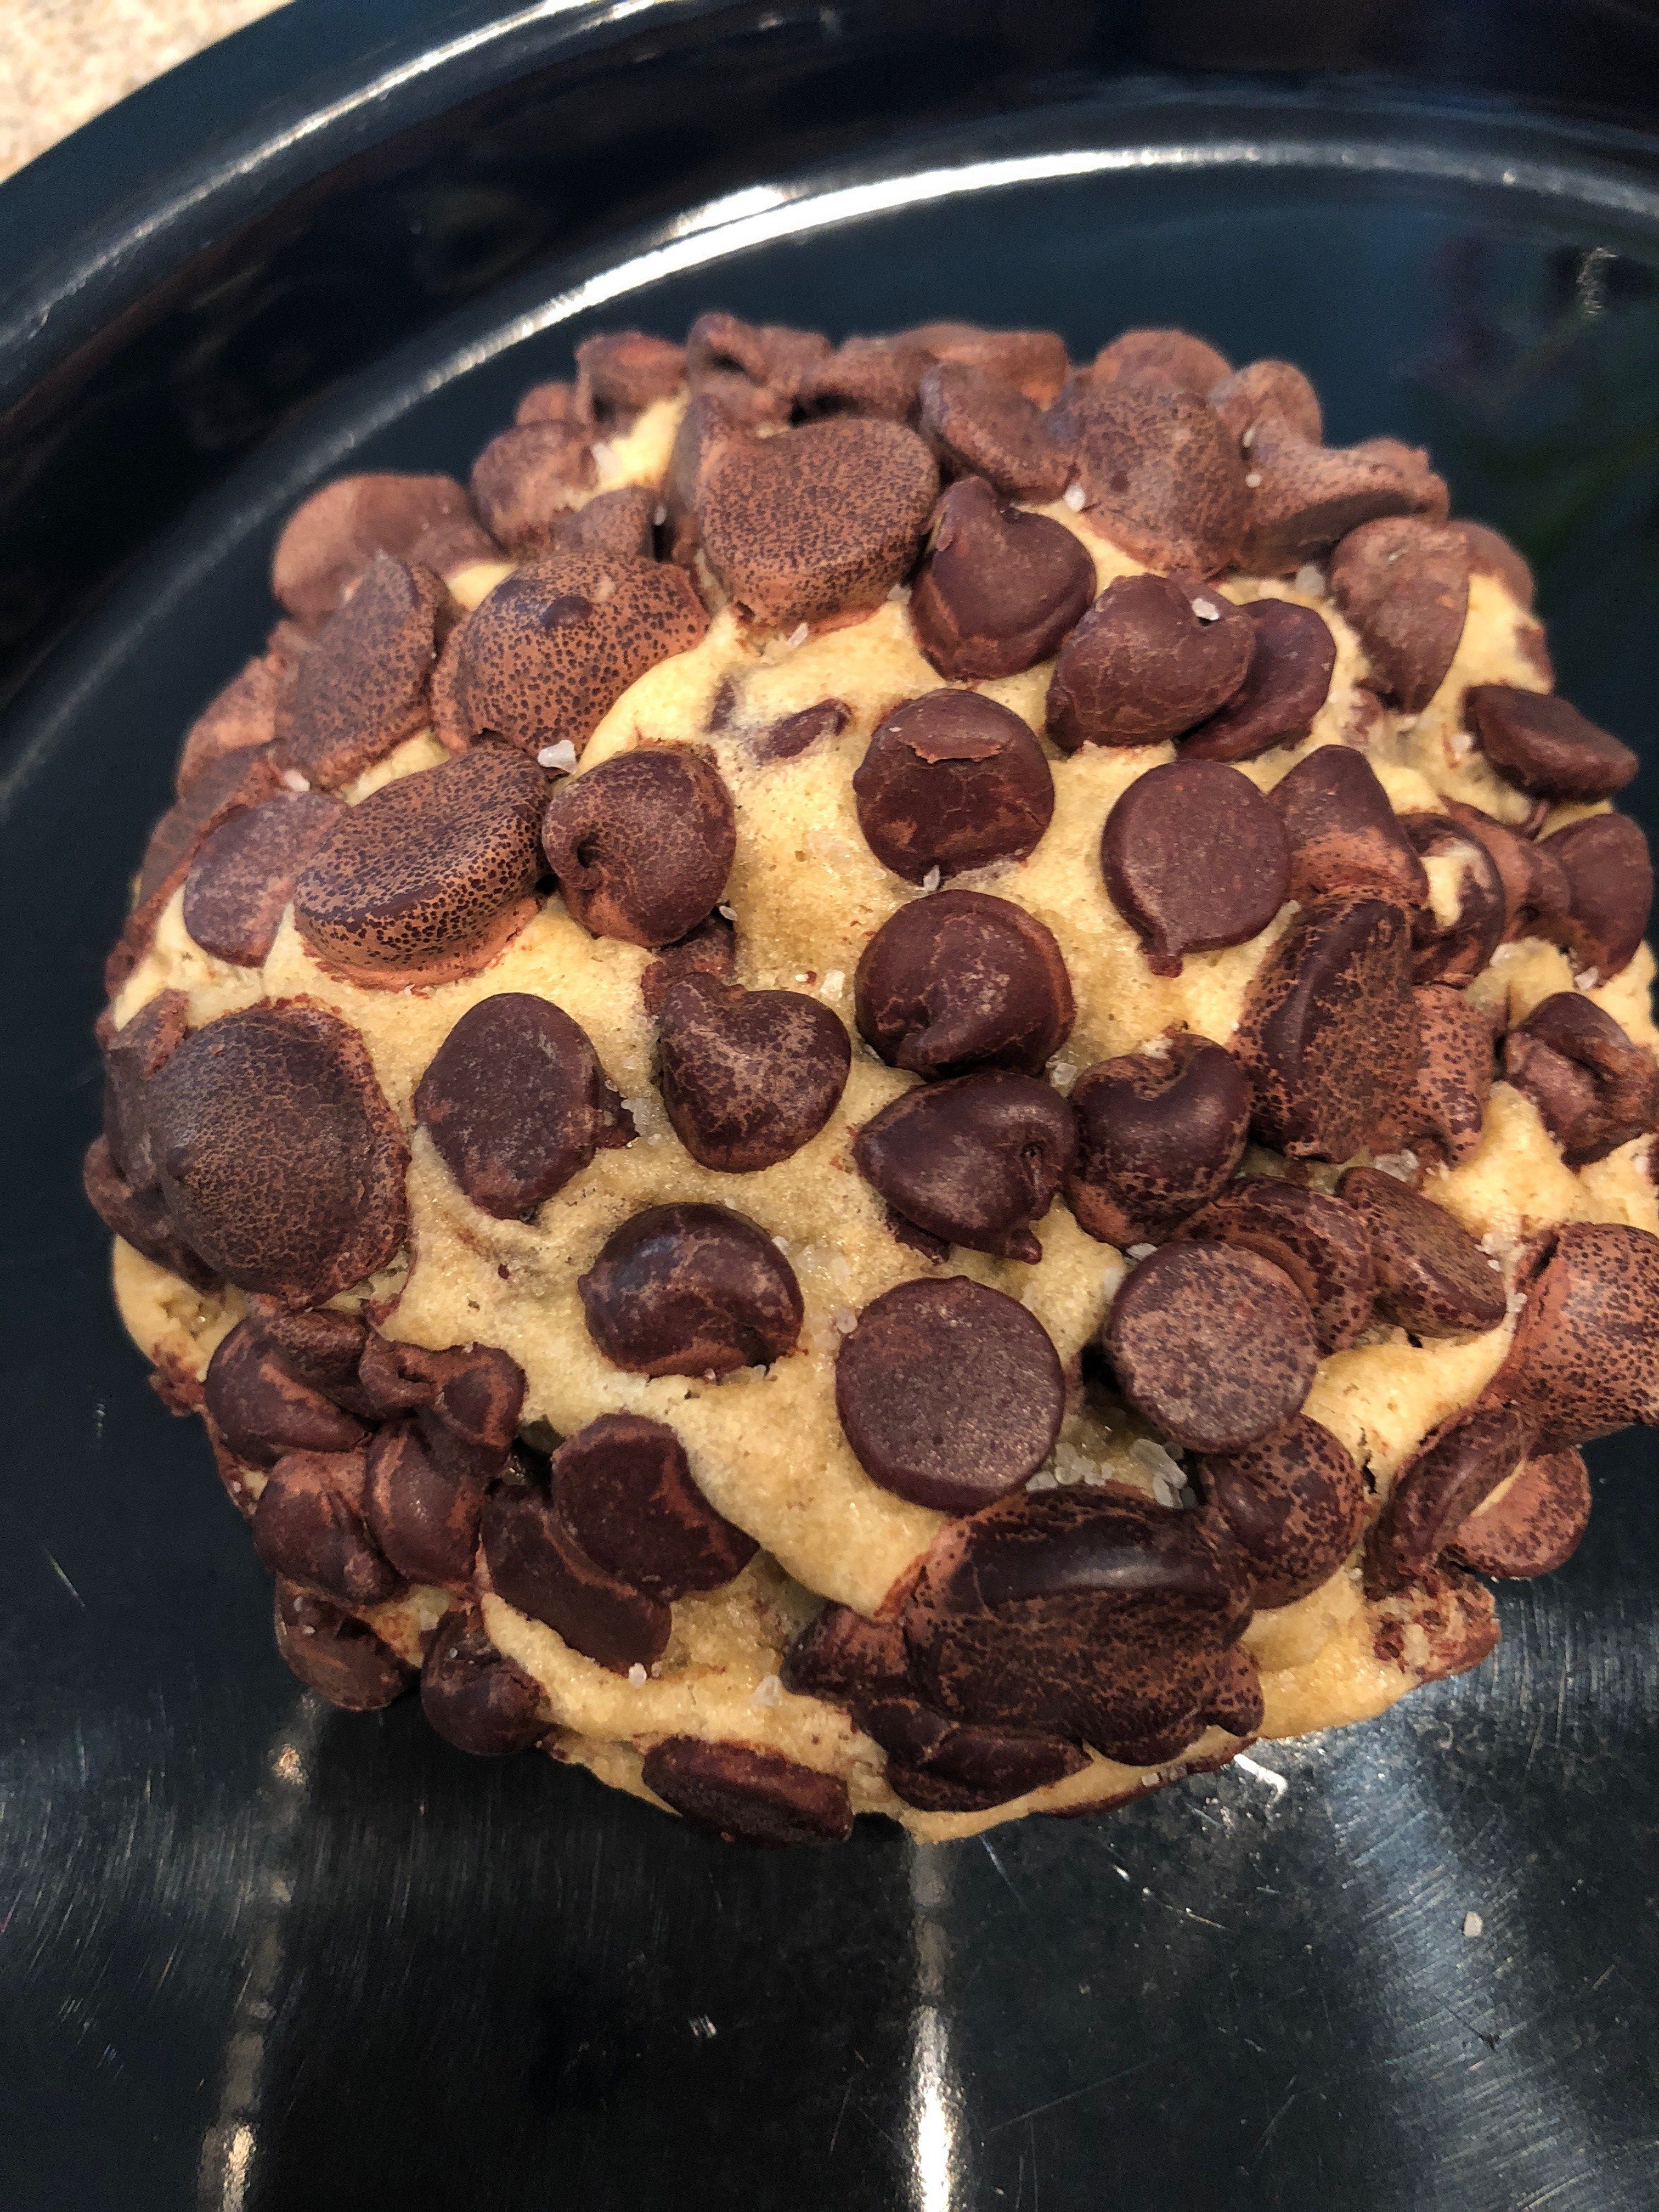 The Polite Pig Invites You to Celebrate National Chocolate Chip Cookie Day with this Delight!